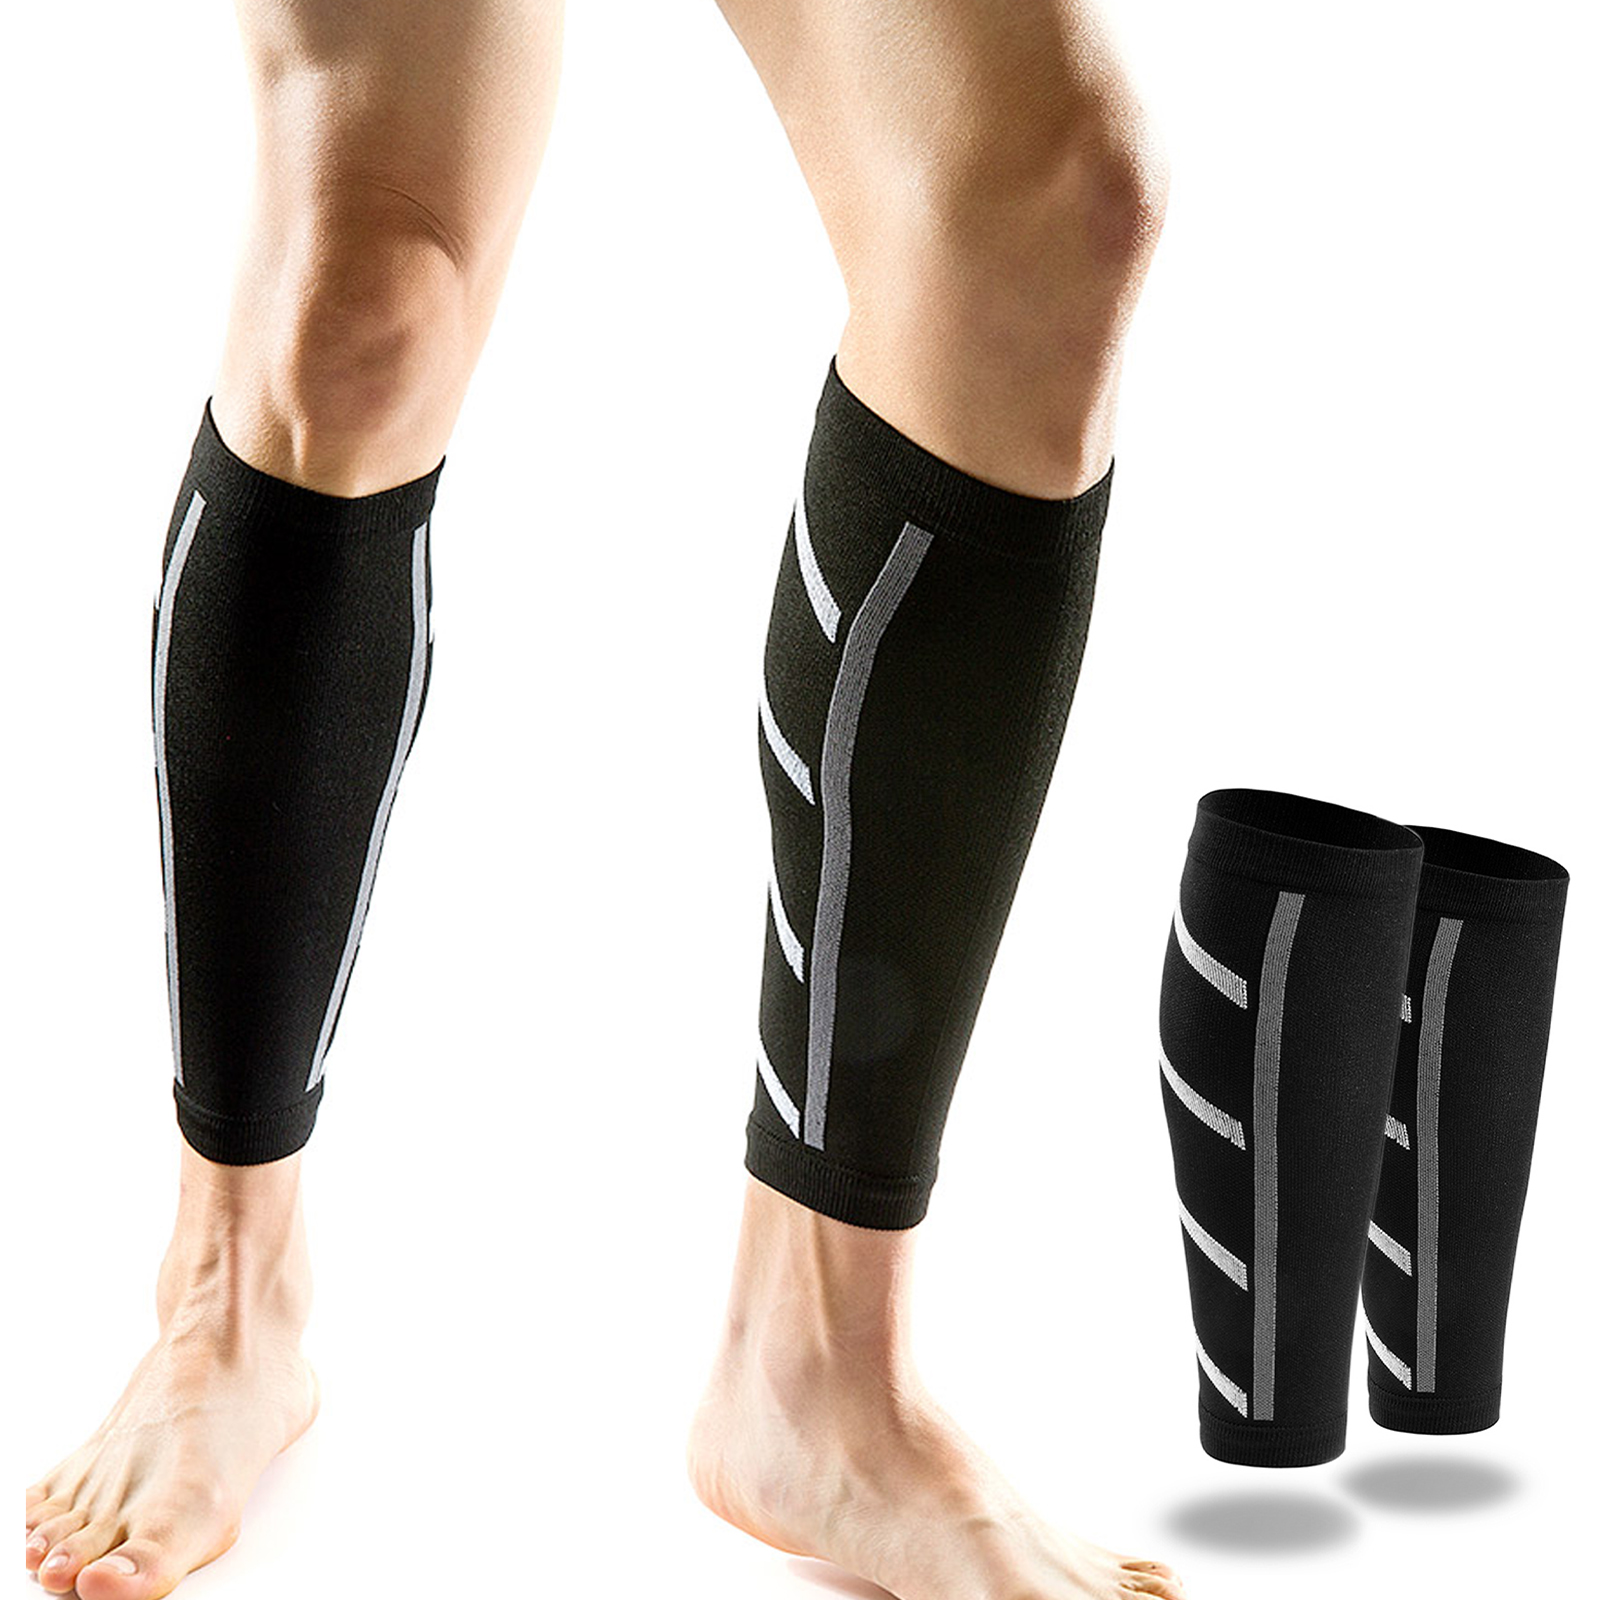 

1 Pair Calf Support Compression Cover, Uv Sun Protection Leg Compression Socks, Without Foot Sleeve Anti-slip, For Men And Women Playing Basketball Football Running Jogging Cycling